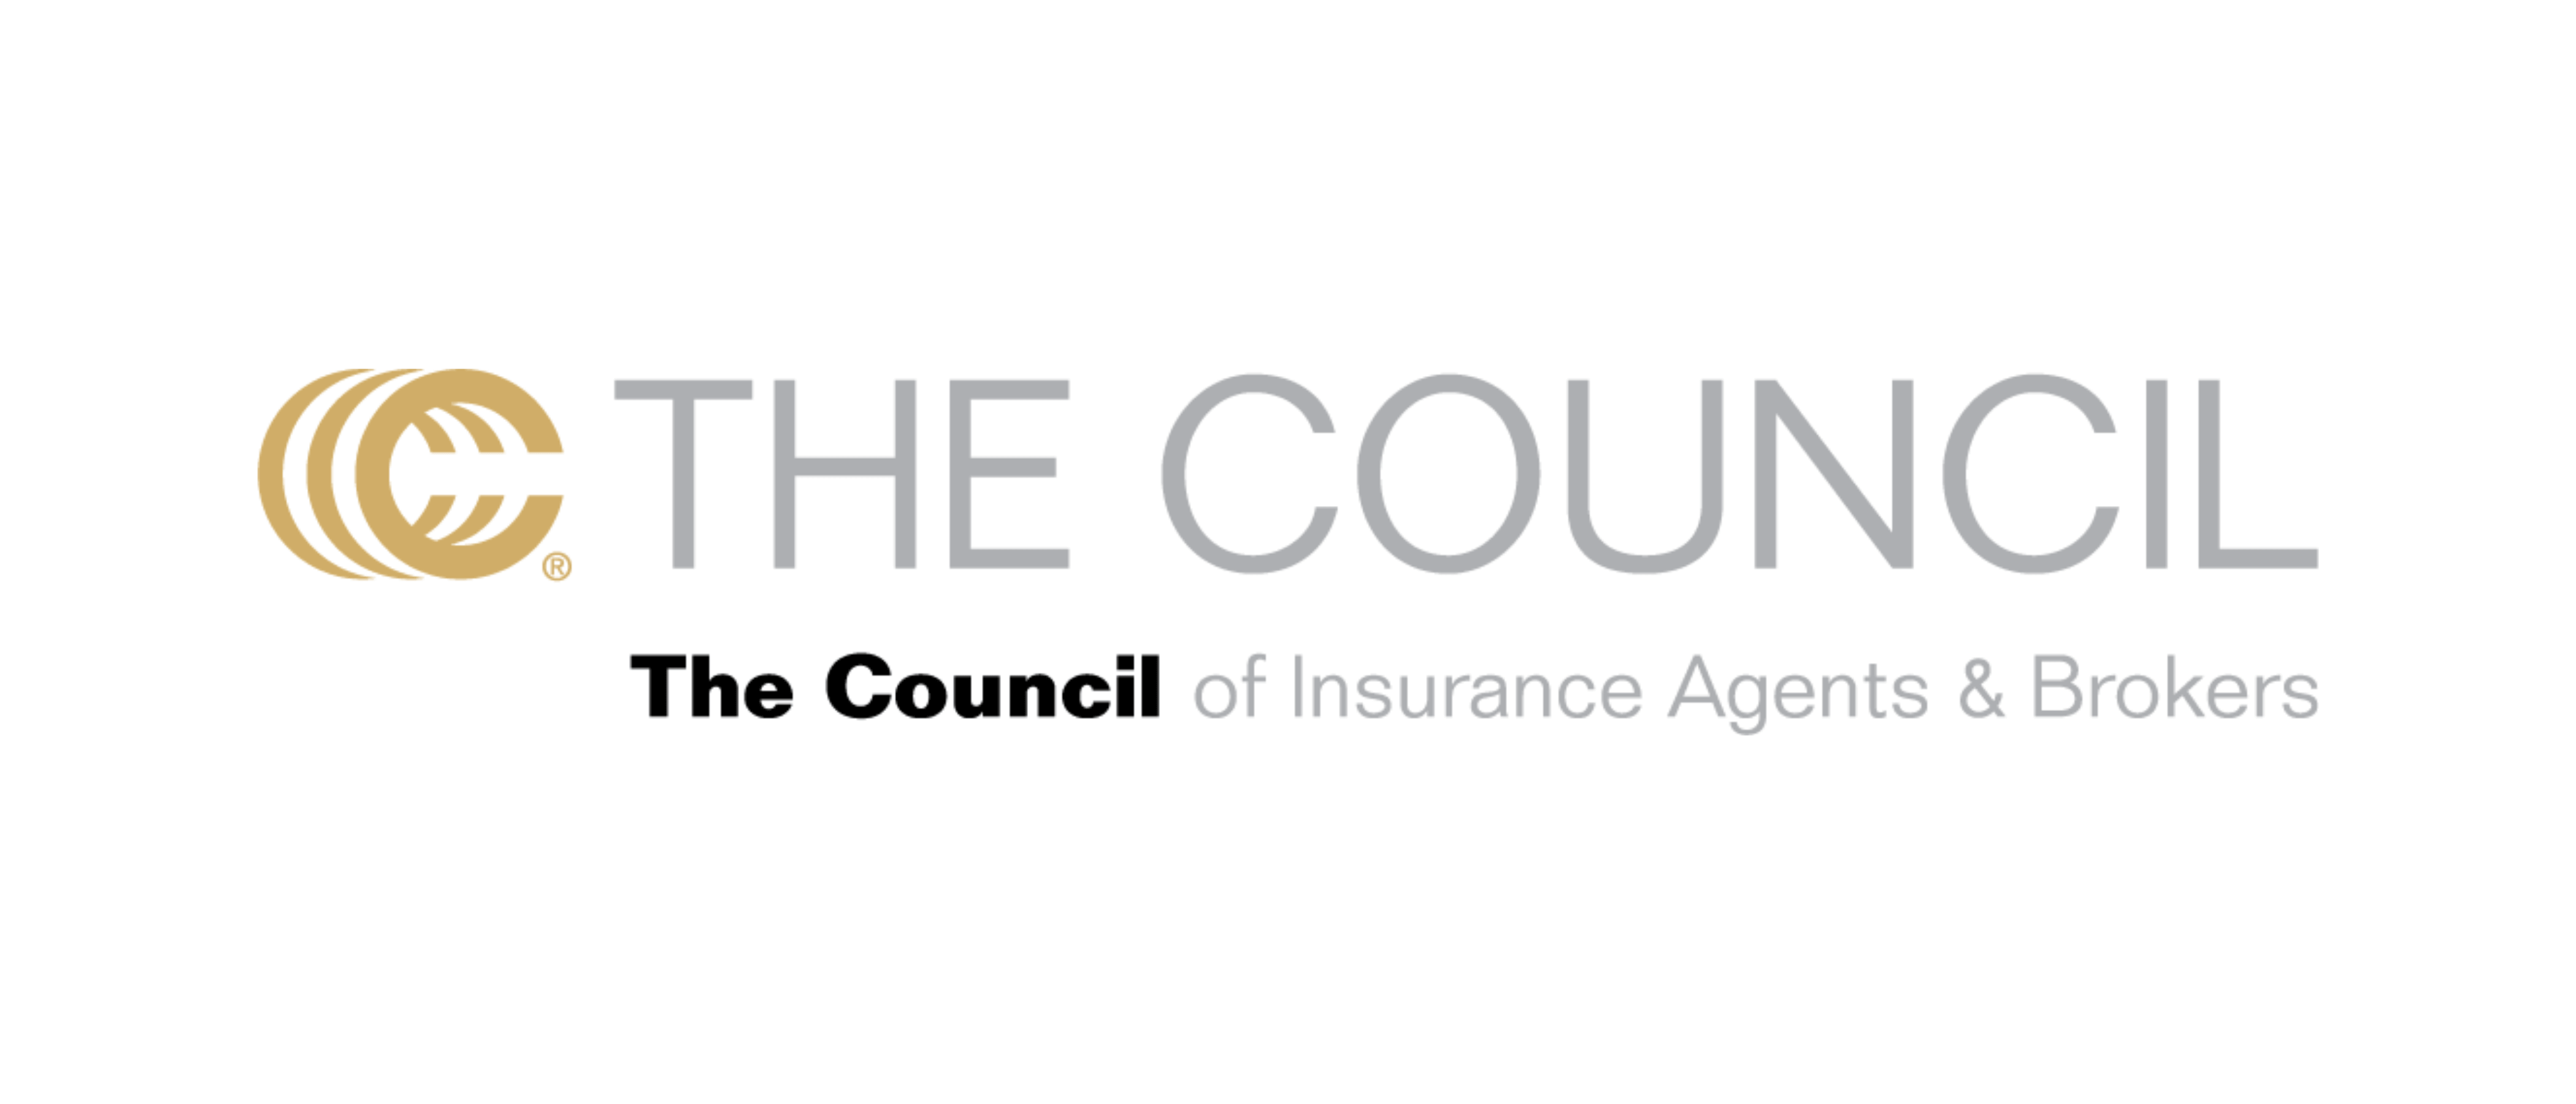 The Council of Insurance Agents & Brokers (CIAB) Corporate Logo